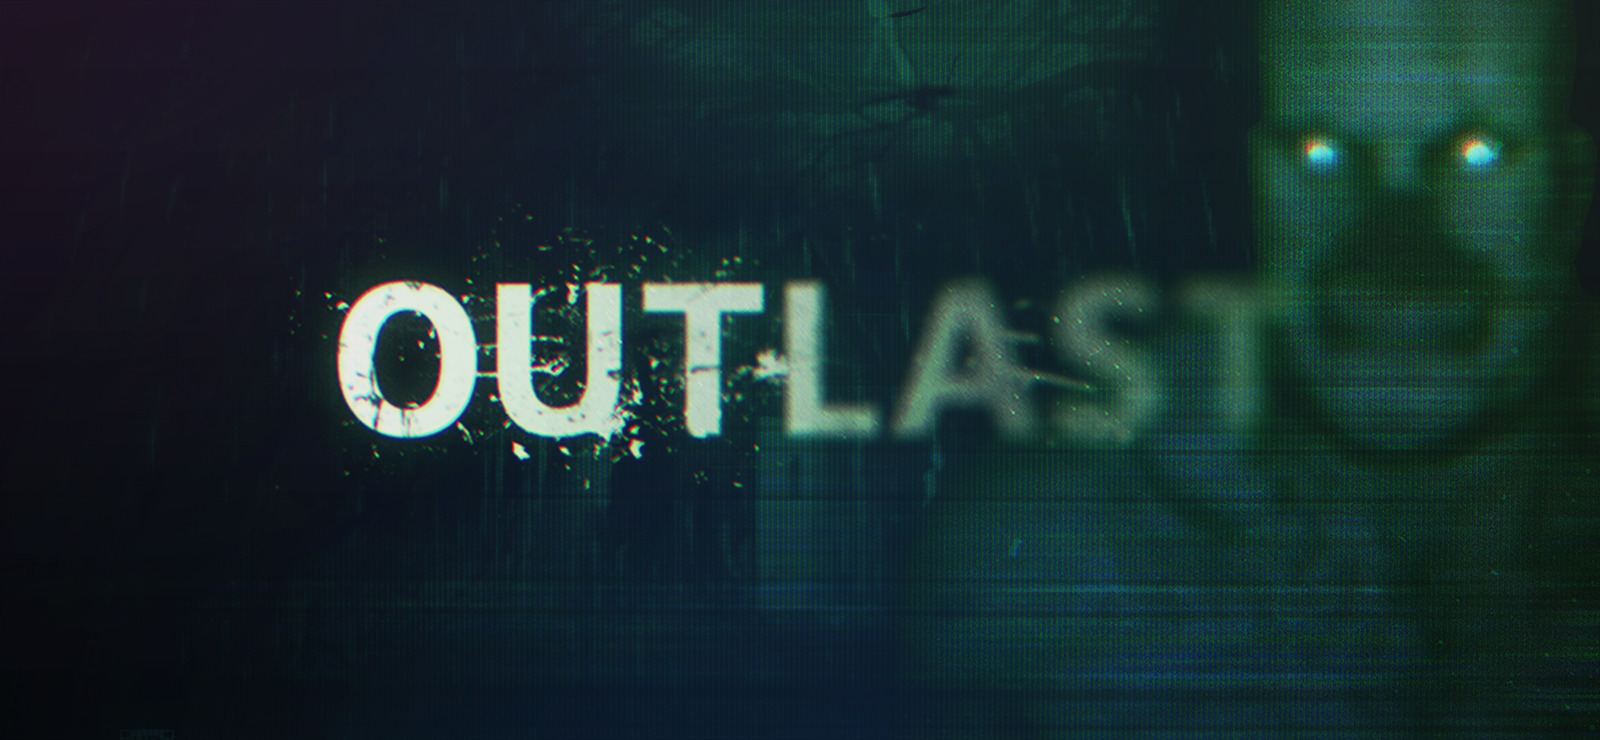 outlast trial download free